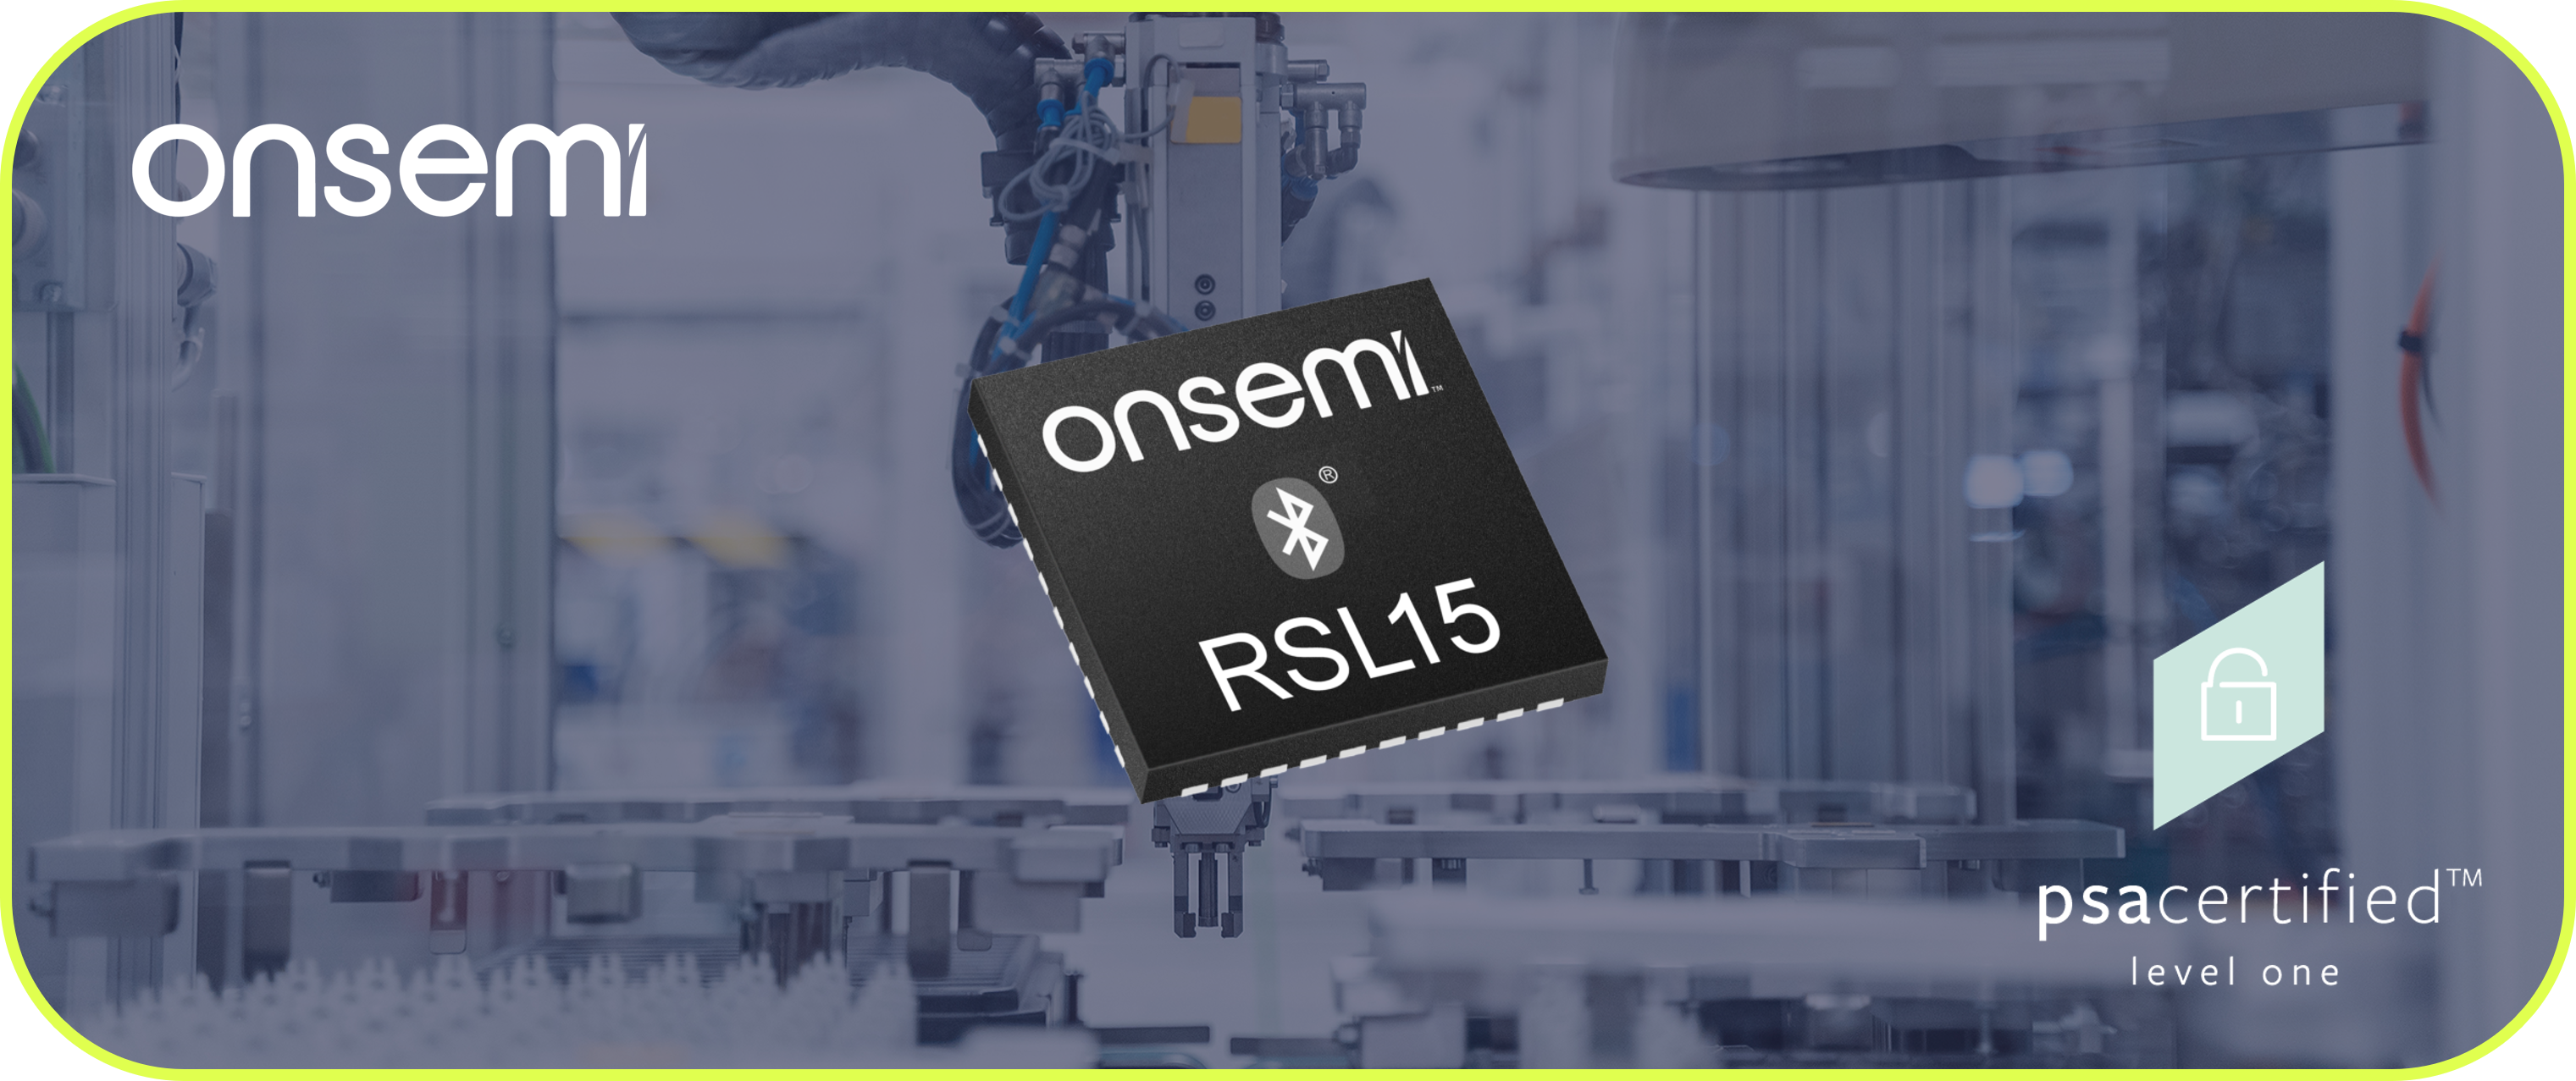 The onsemi RSL15 is a secure, ultra-low power, high performance, Bluetooth low energy microcontroller with PSA Certified Level 1 certification.